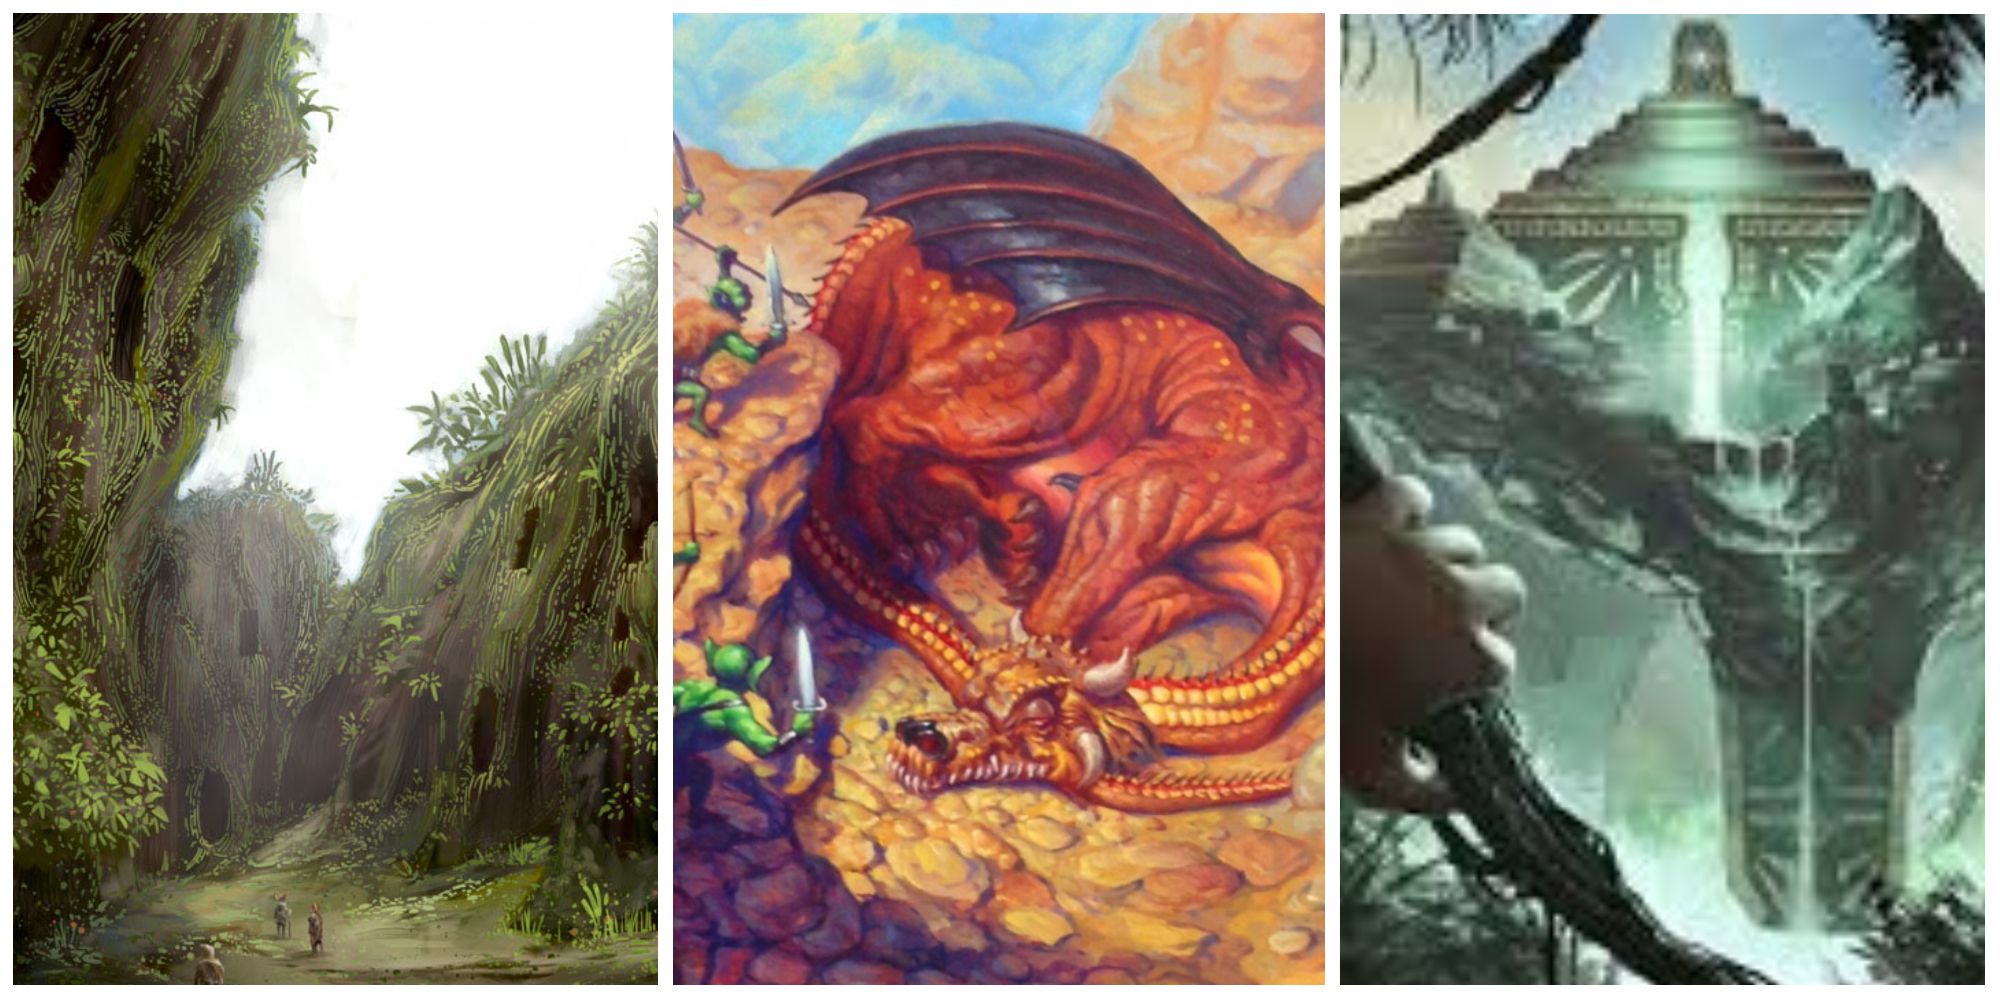 Sylvan Library, Sneak Attack, and Exploration artwork from Magic: The Gathering